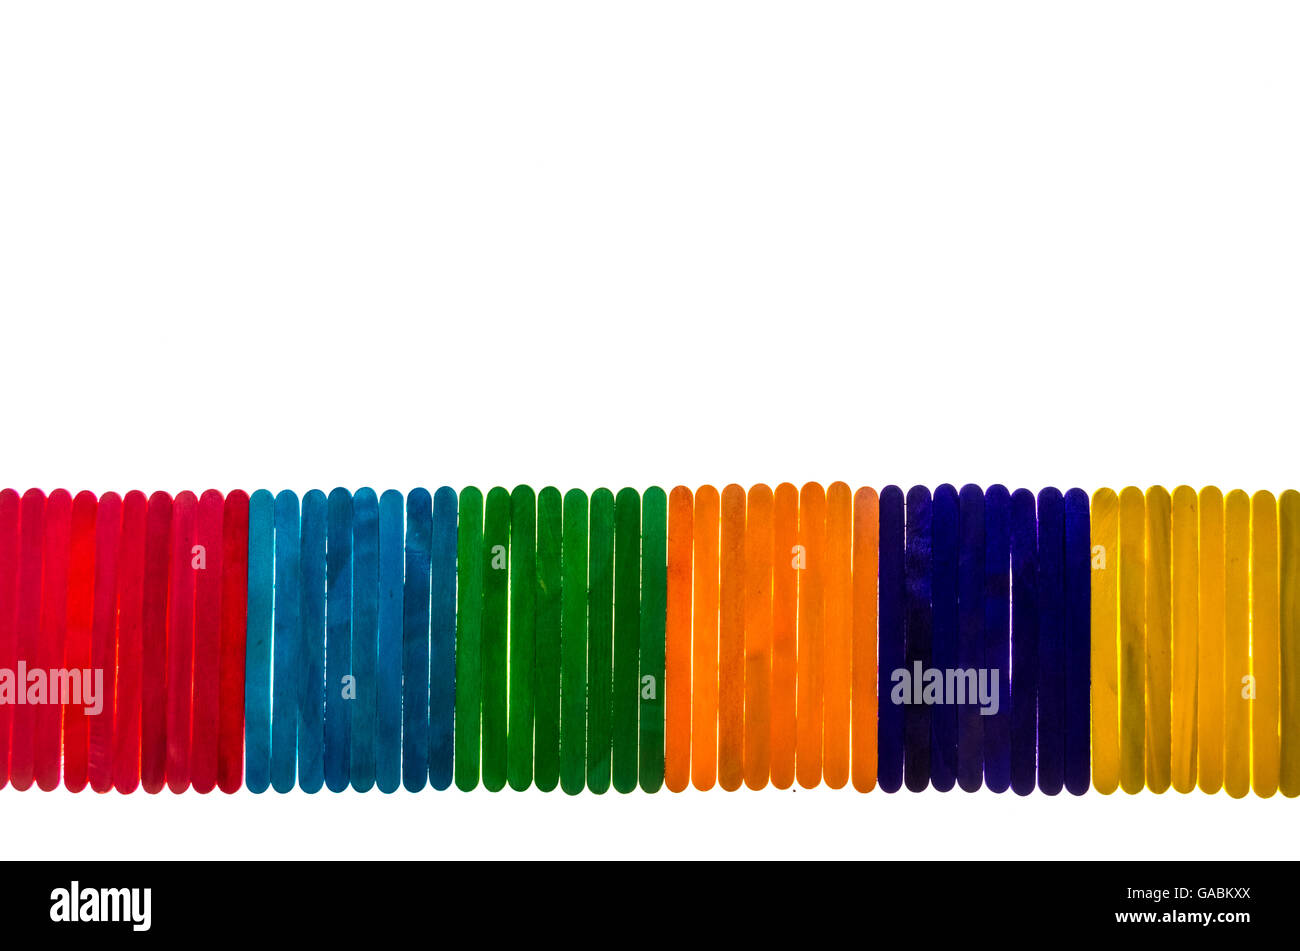 Colorful Popsicle Sticks Over White Background (Shallow Depth Of Field).  Stock Photo, Picture and Royalty Free Image. Image 60672739.